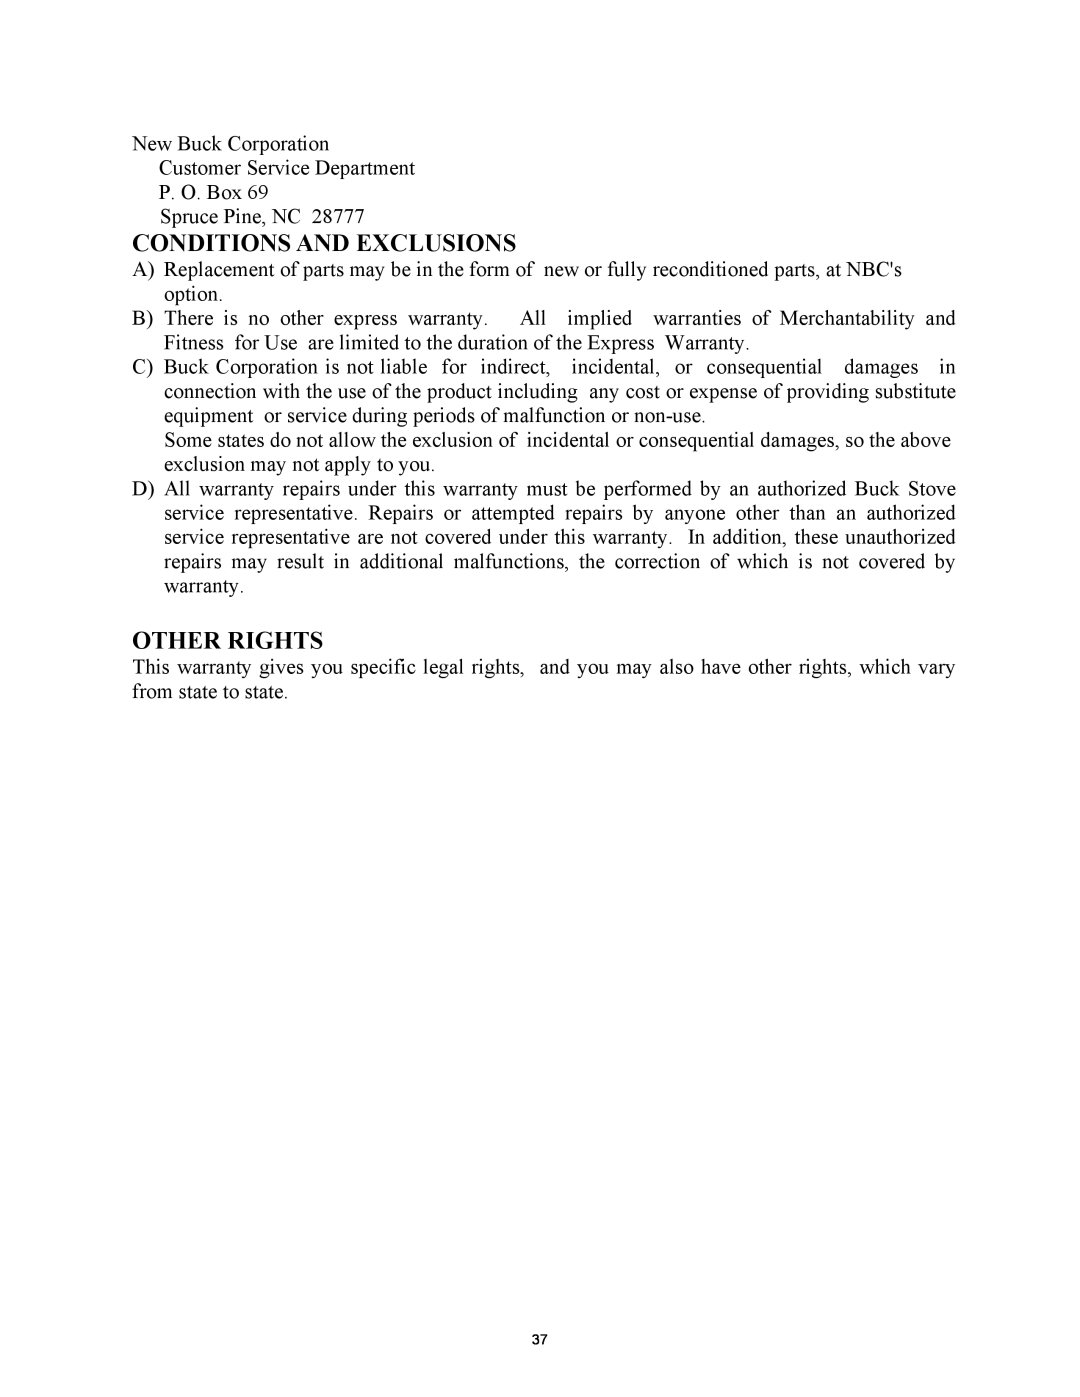 New Buck Corporation 81 installation instructions Conditions And Exclusions, Other Rights 